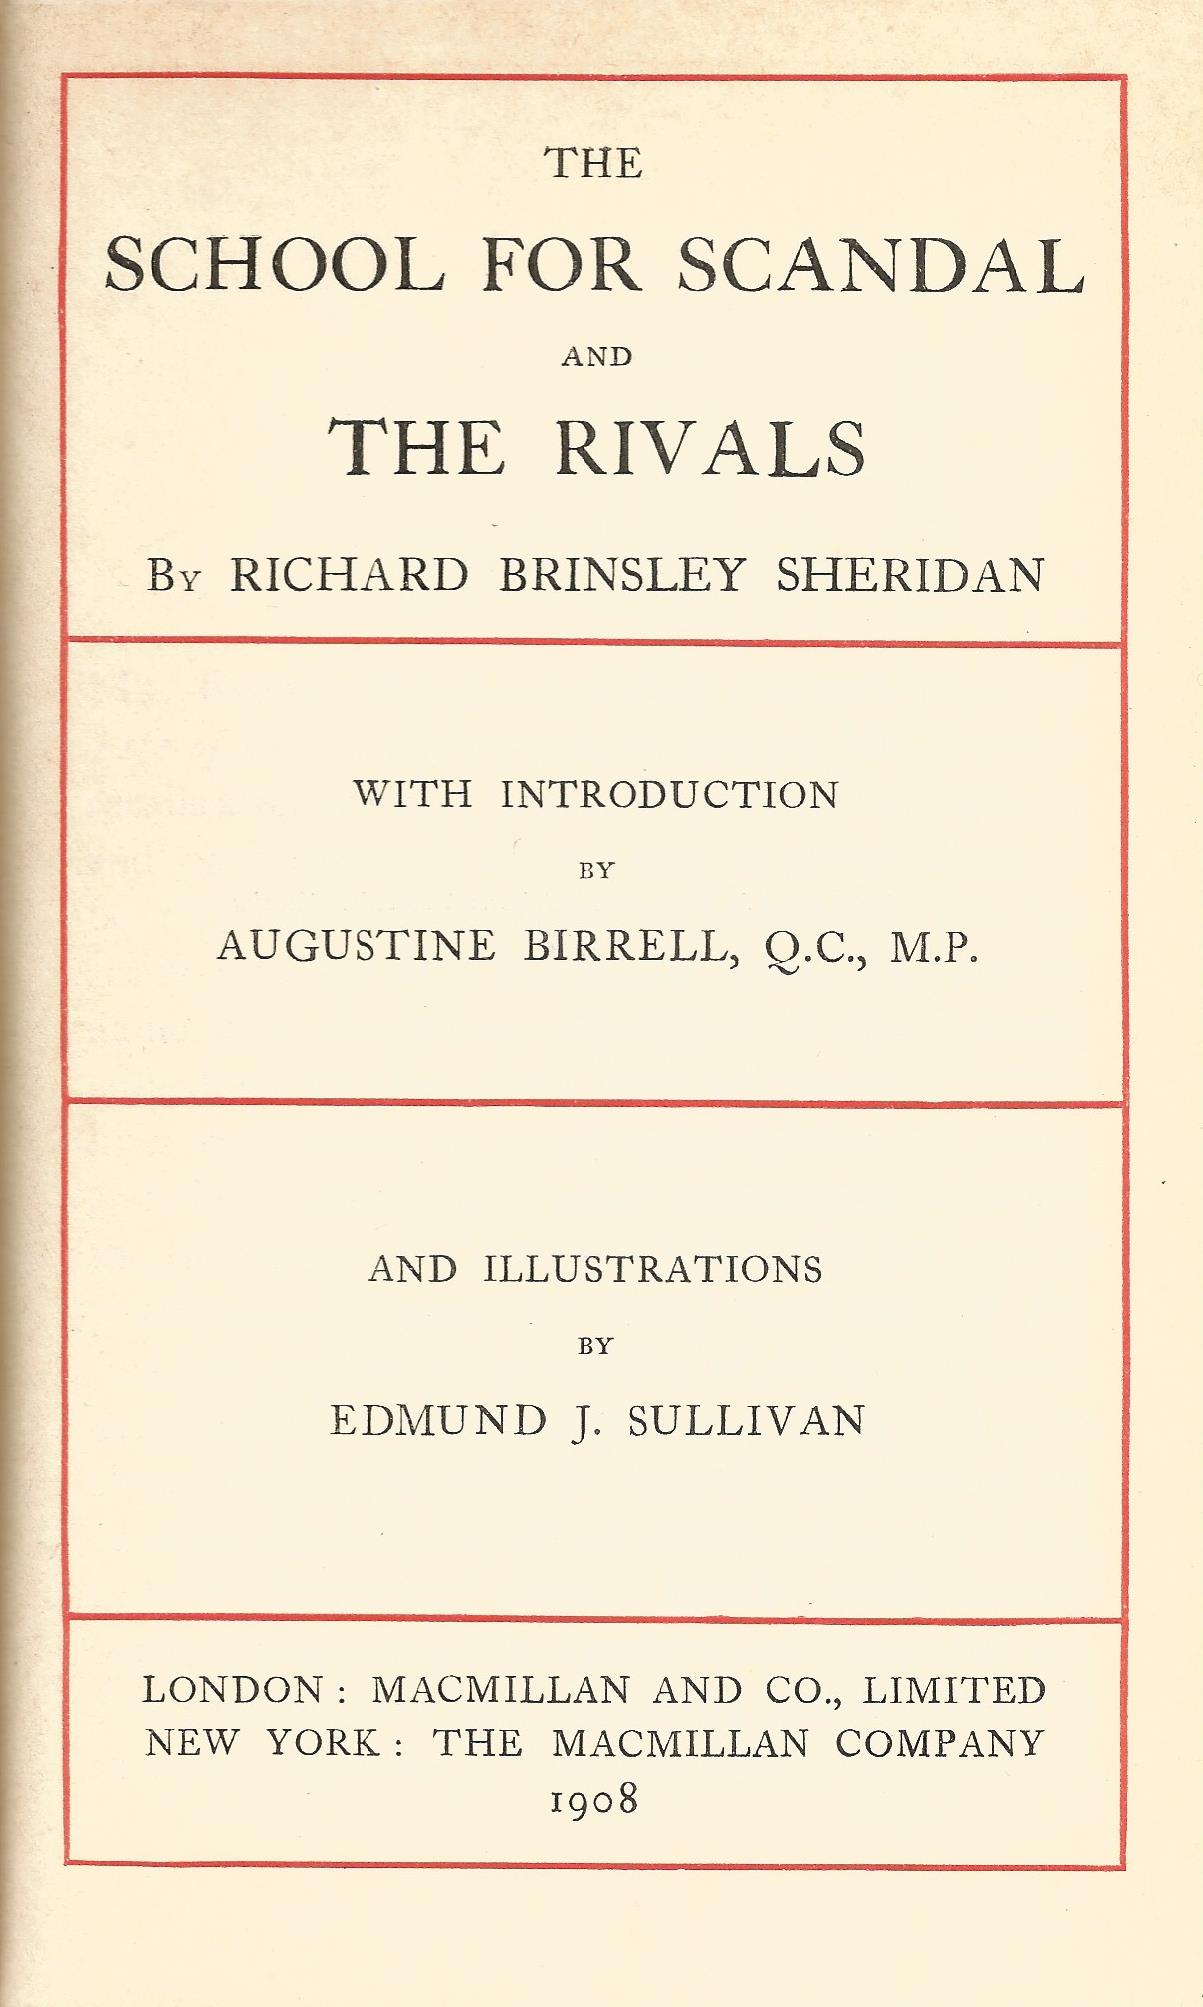 The School for Scandal and the Rivals by Richard Brinsley Sheridan 1908 Hardback Book First - Image 2 of 3